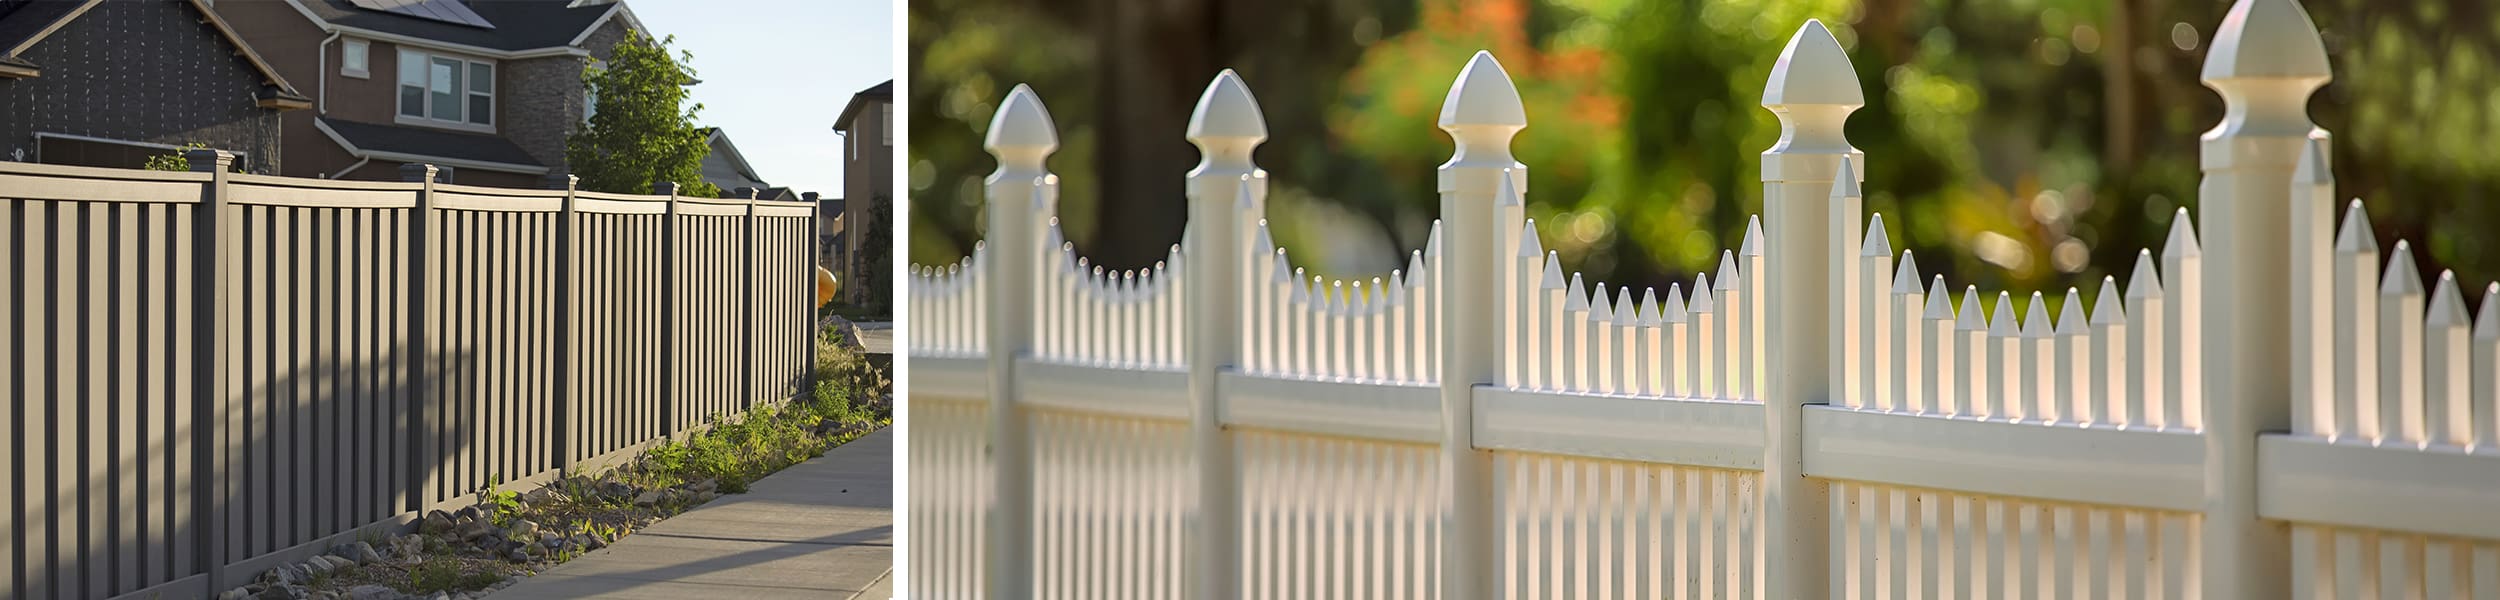 Aurora Plastics offers an exceptionally durable line of compounds for fencing & outdoor applications, including rigid PVCs & cellular foam rigid PVC products.